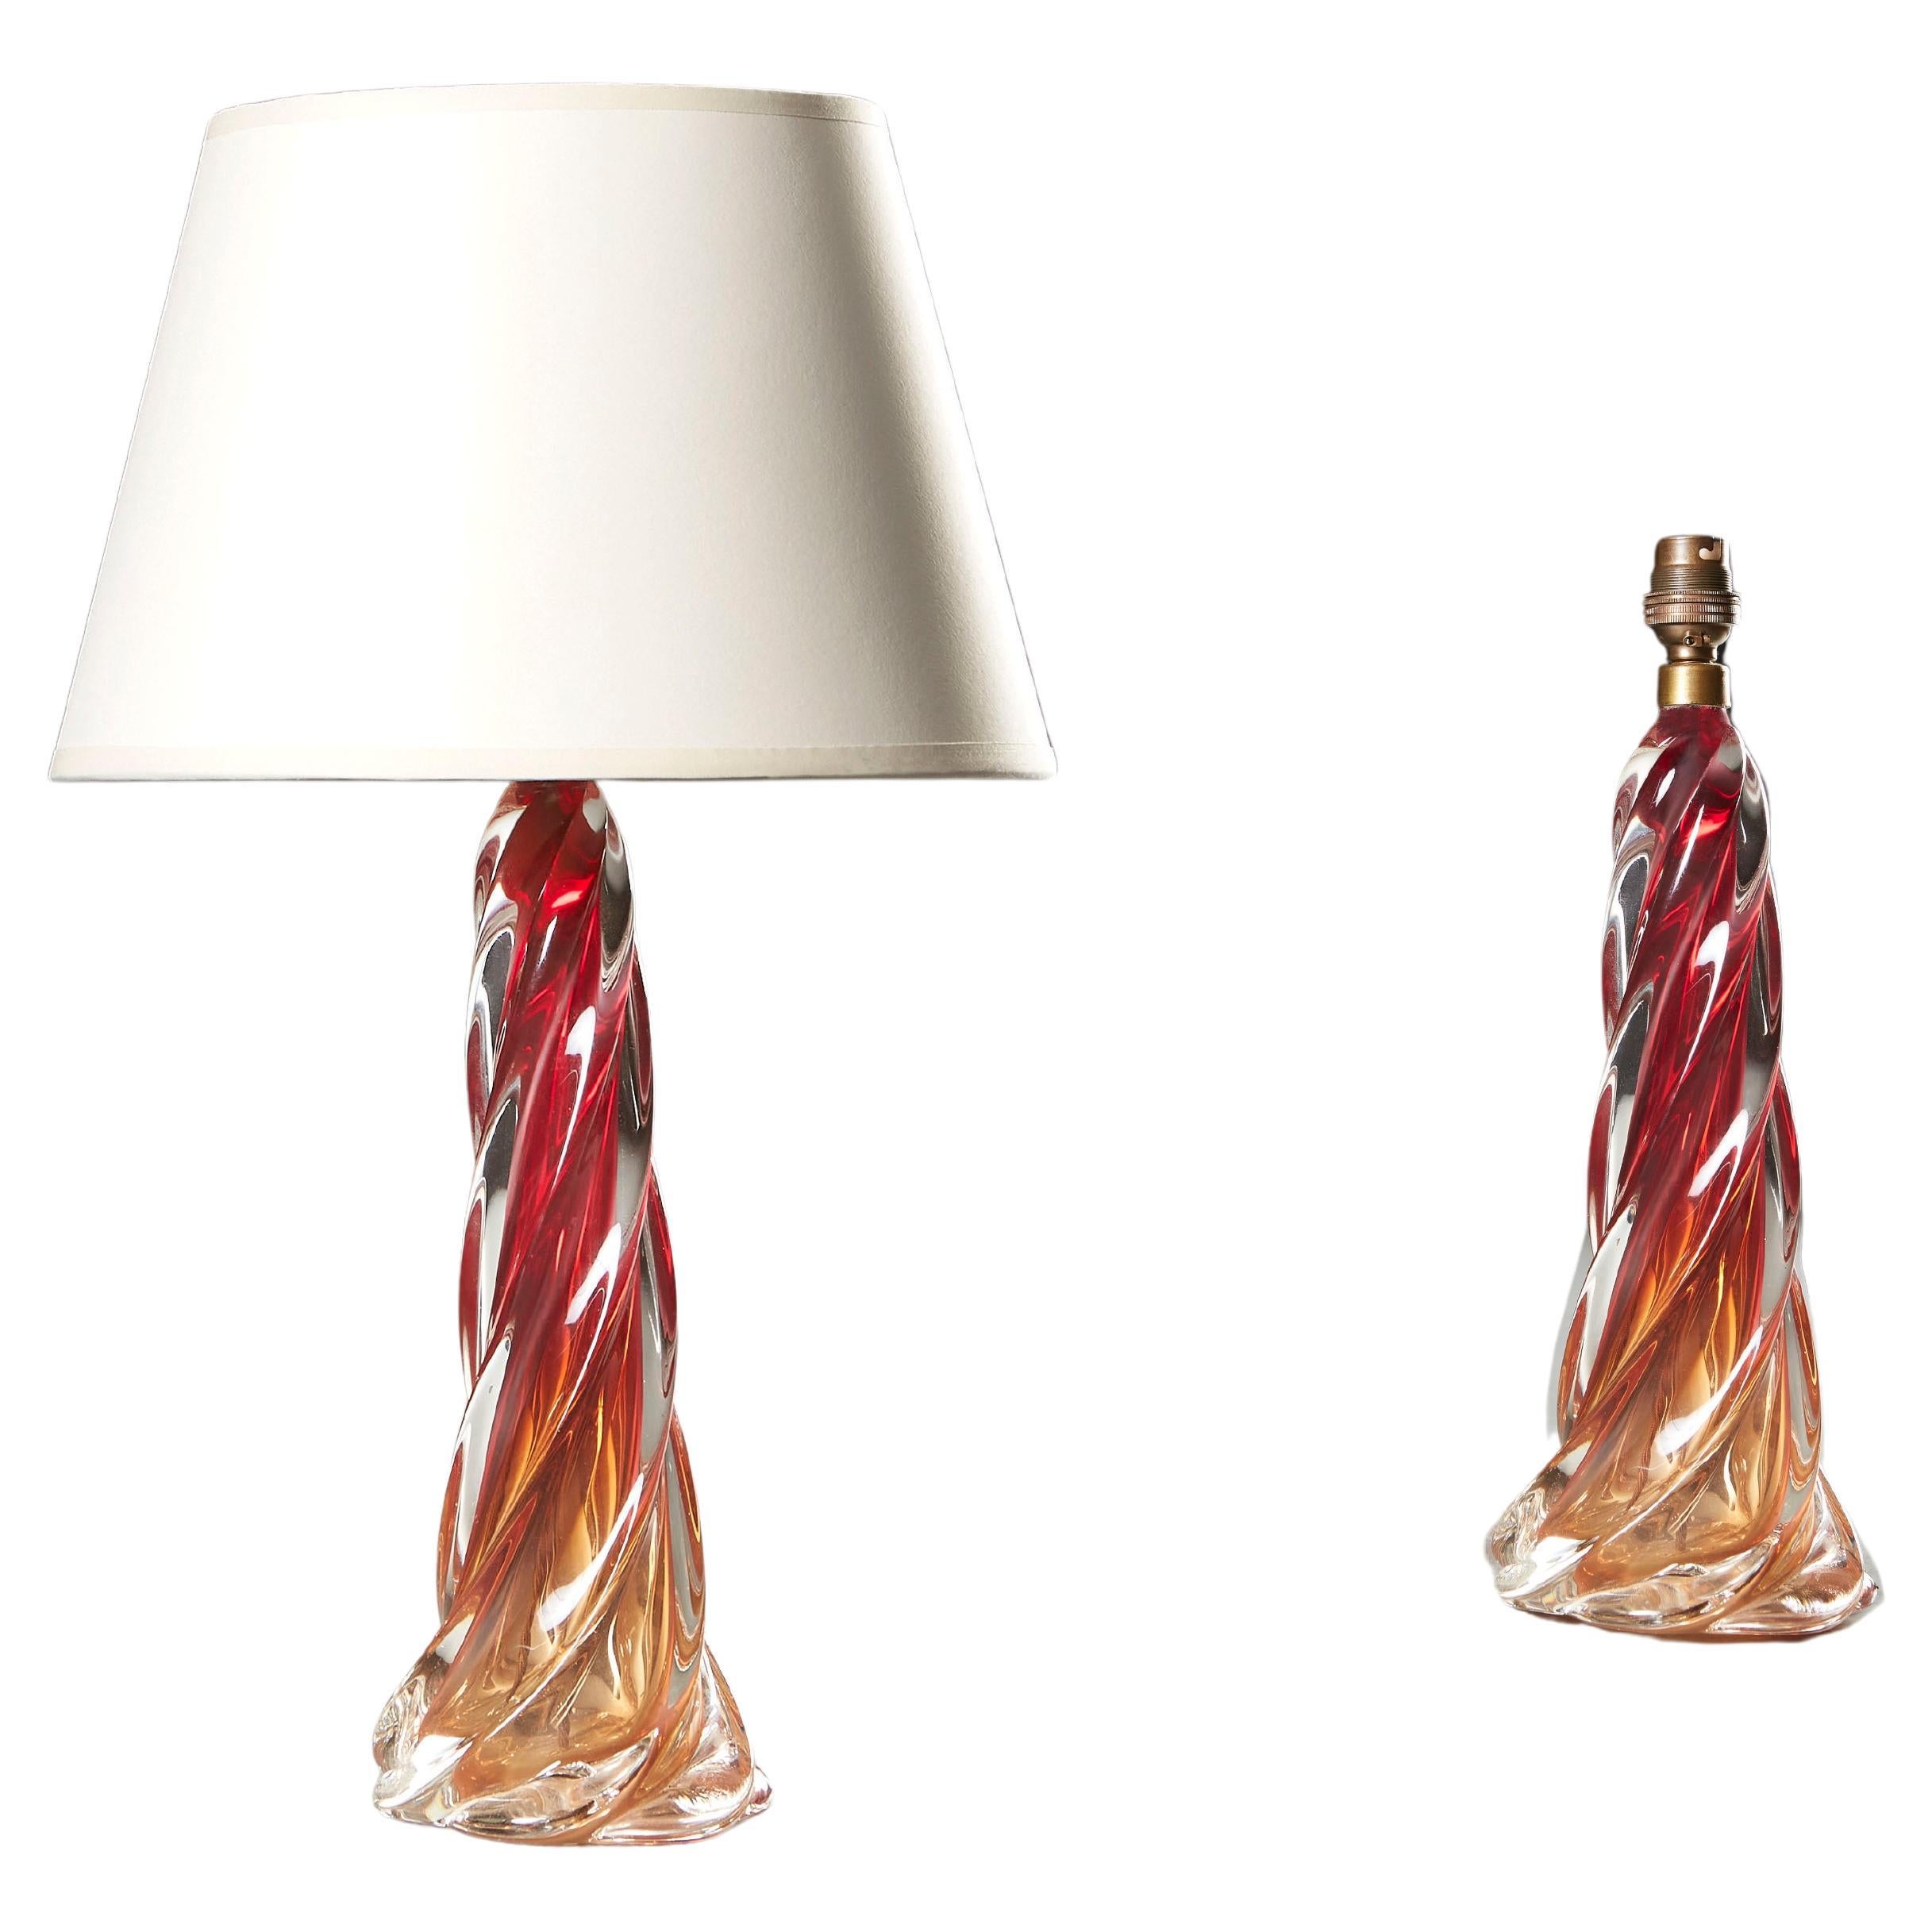 A Matched Pair of Red Murano Glass Spiral Table Lamps For Sale